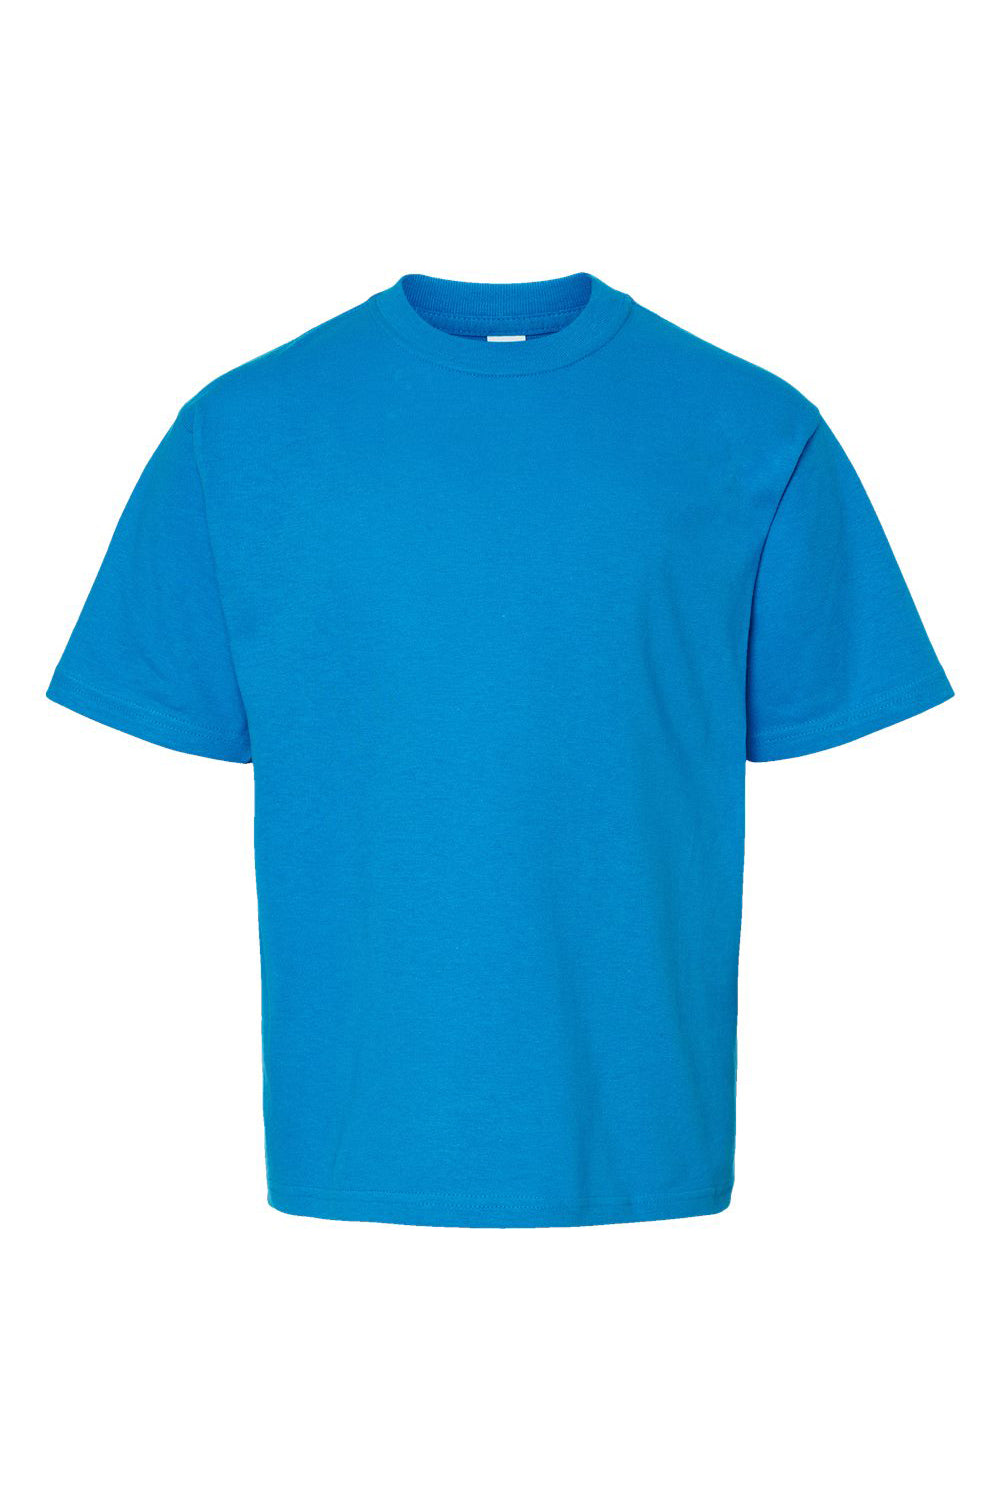 M&O 4850 Youth Gold Soft Touch Short Sleeve Crewneck T-Shirt Turquoise Blue Flat Front